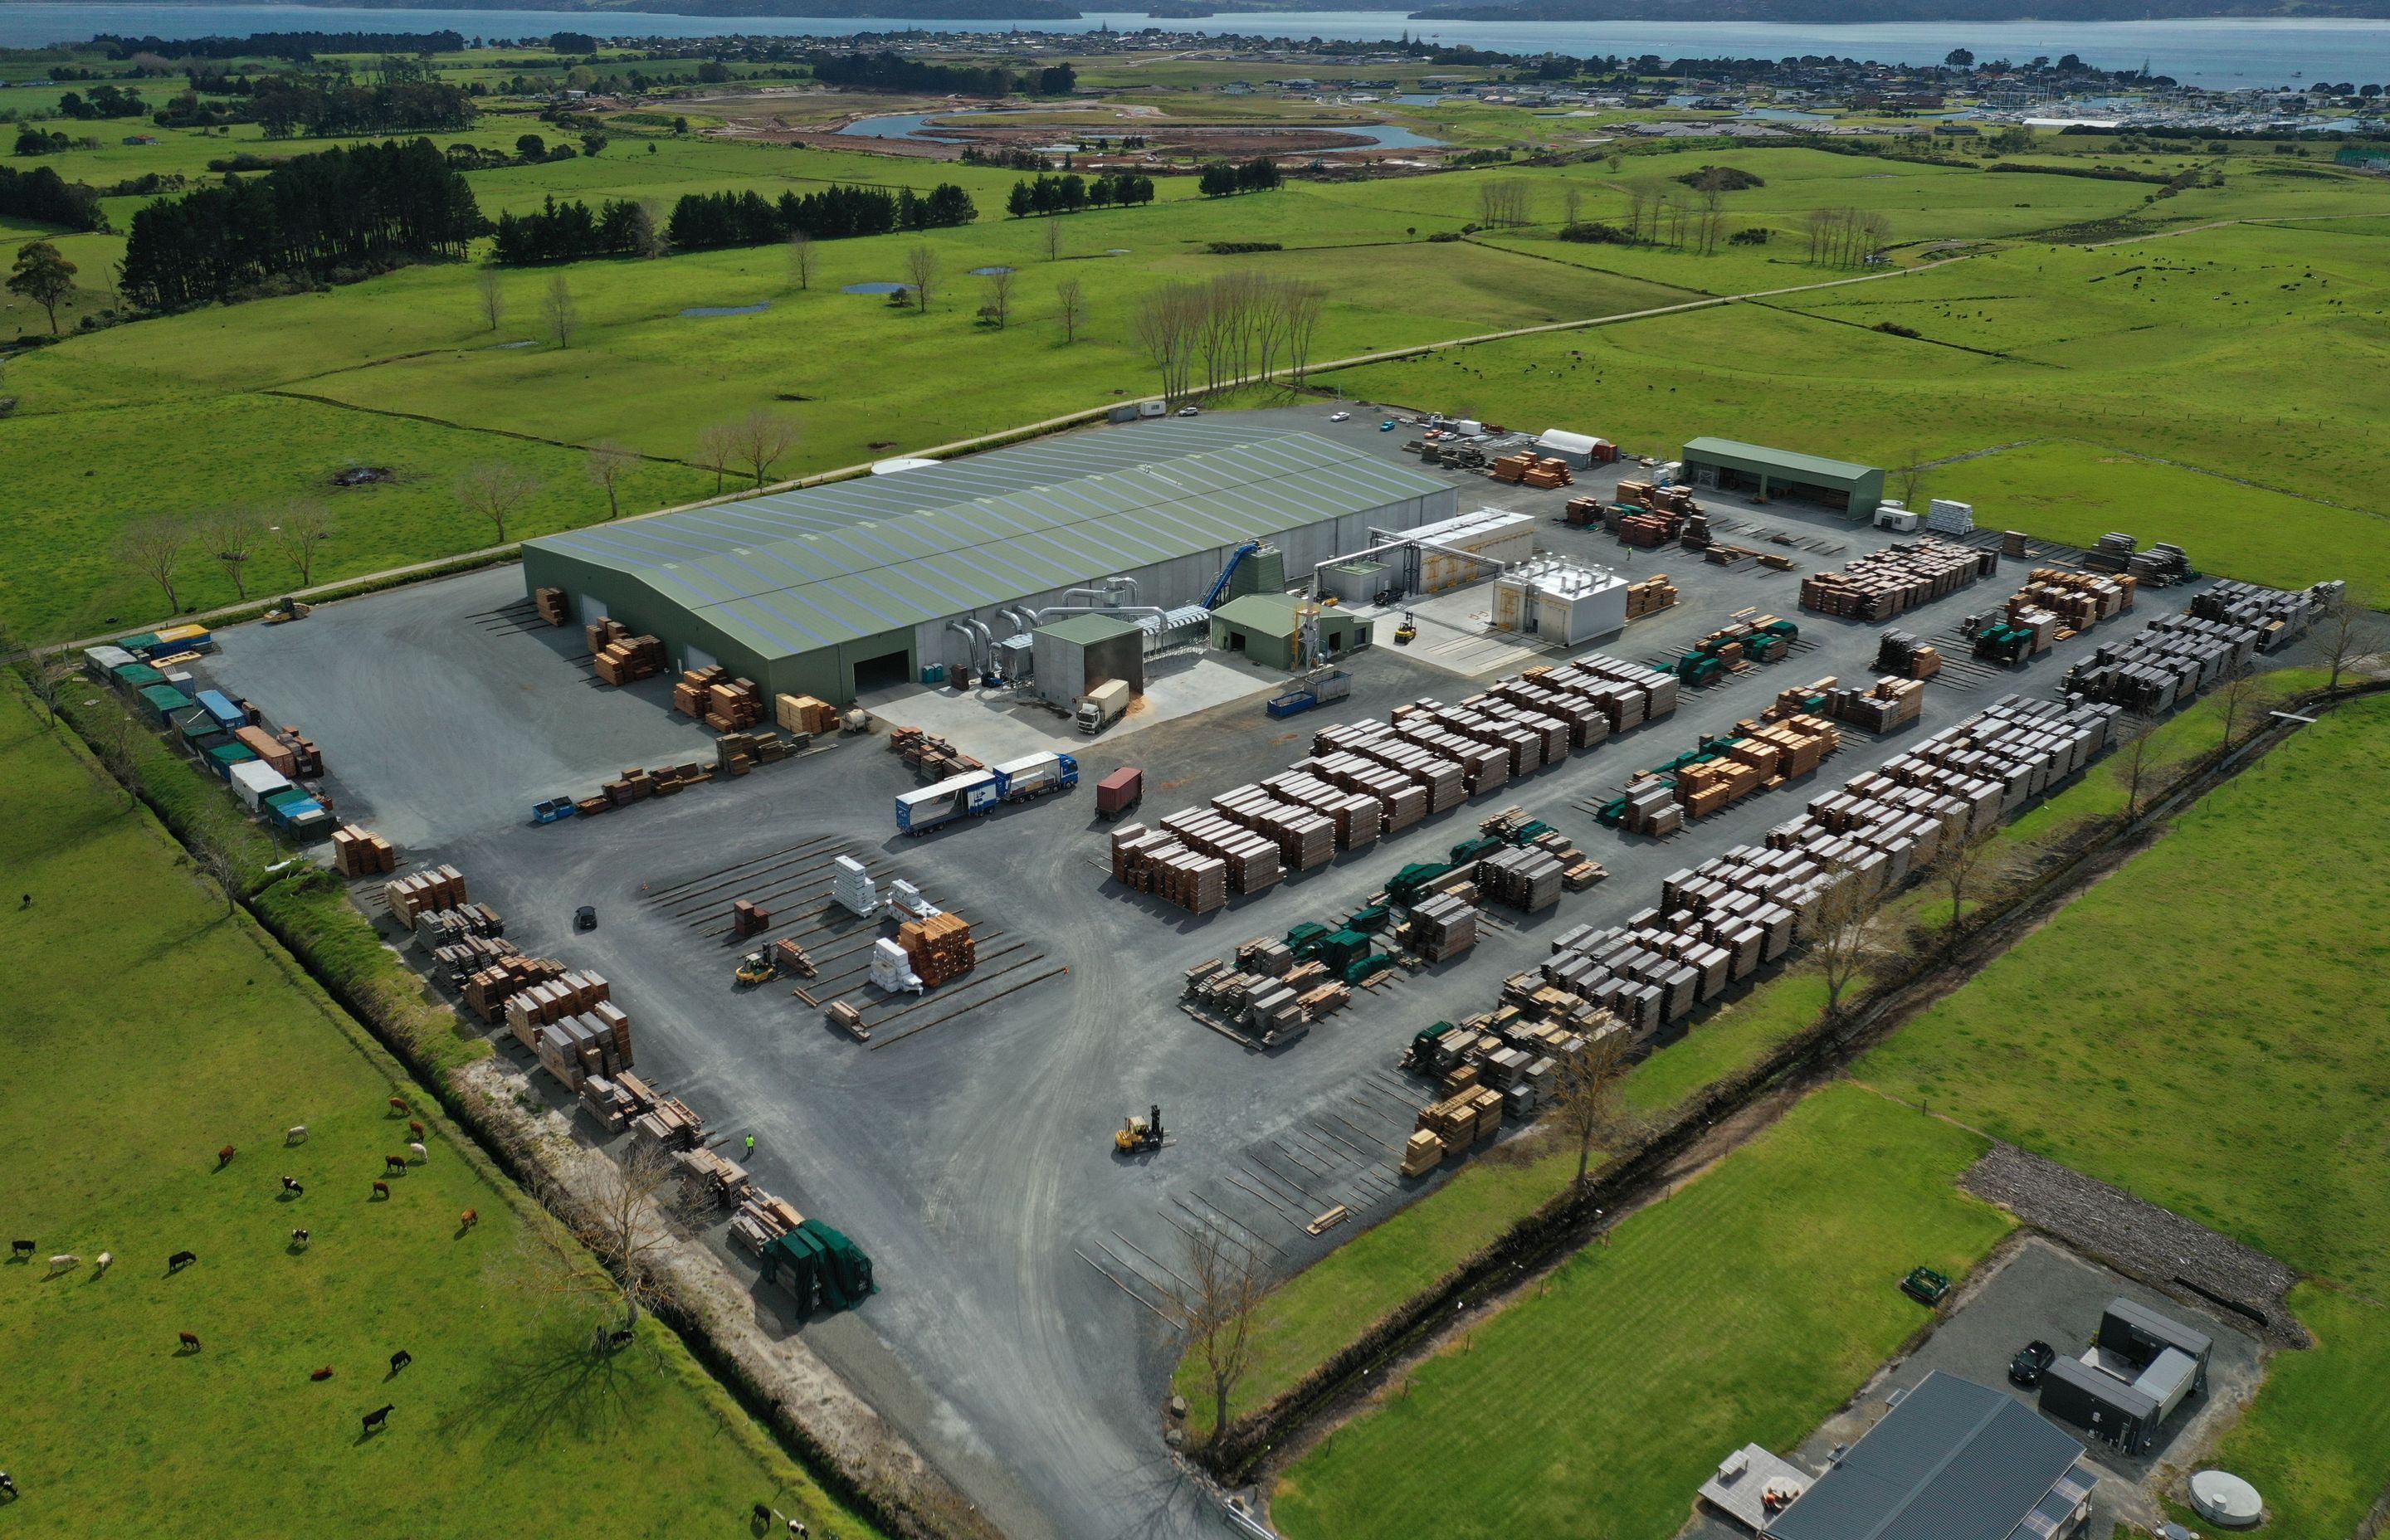 Herman Pacific's new 15,000sqm facility located at Marsden Point. The custom-built building allowed the company to consolidate three or four other sites to expand its capacity and output.